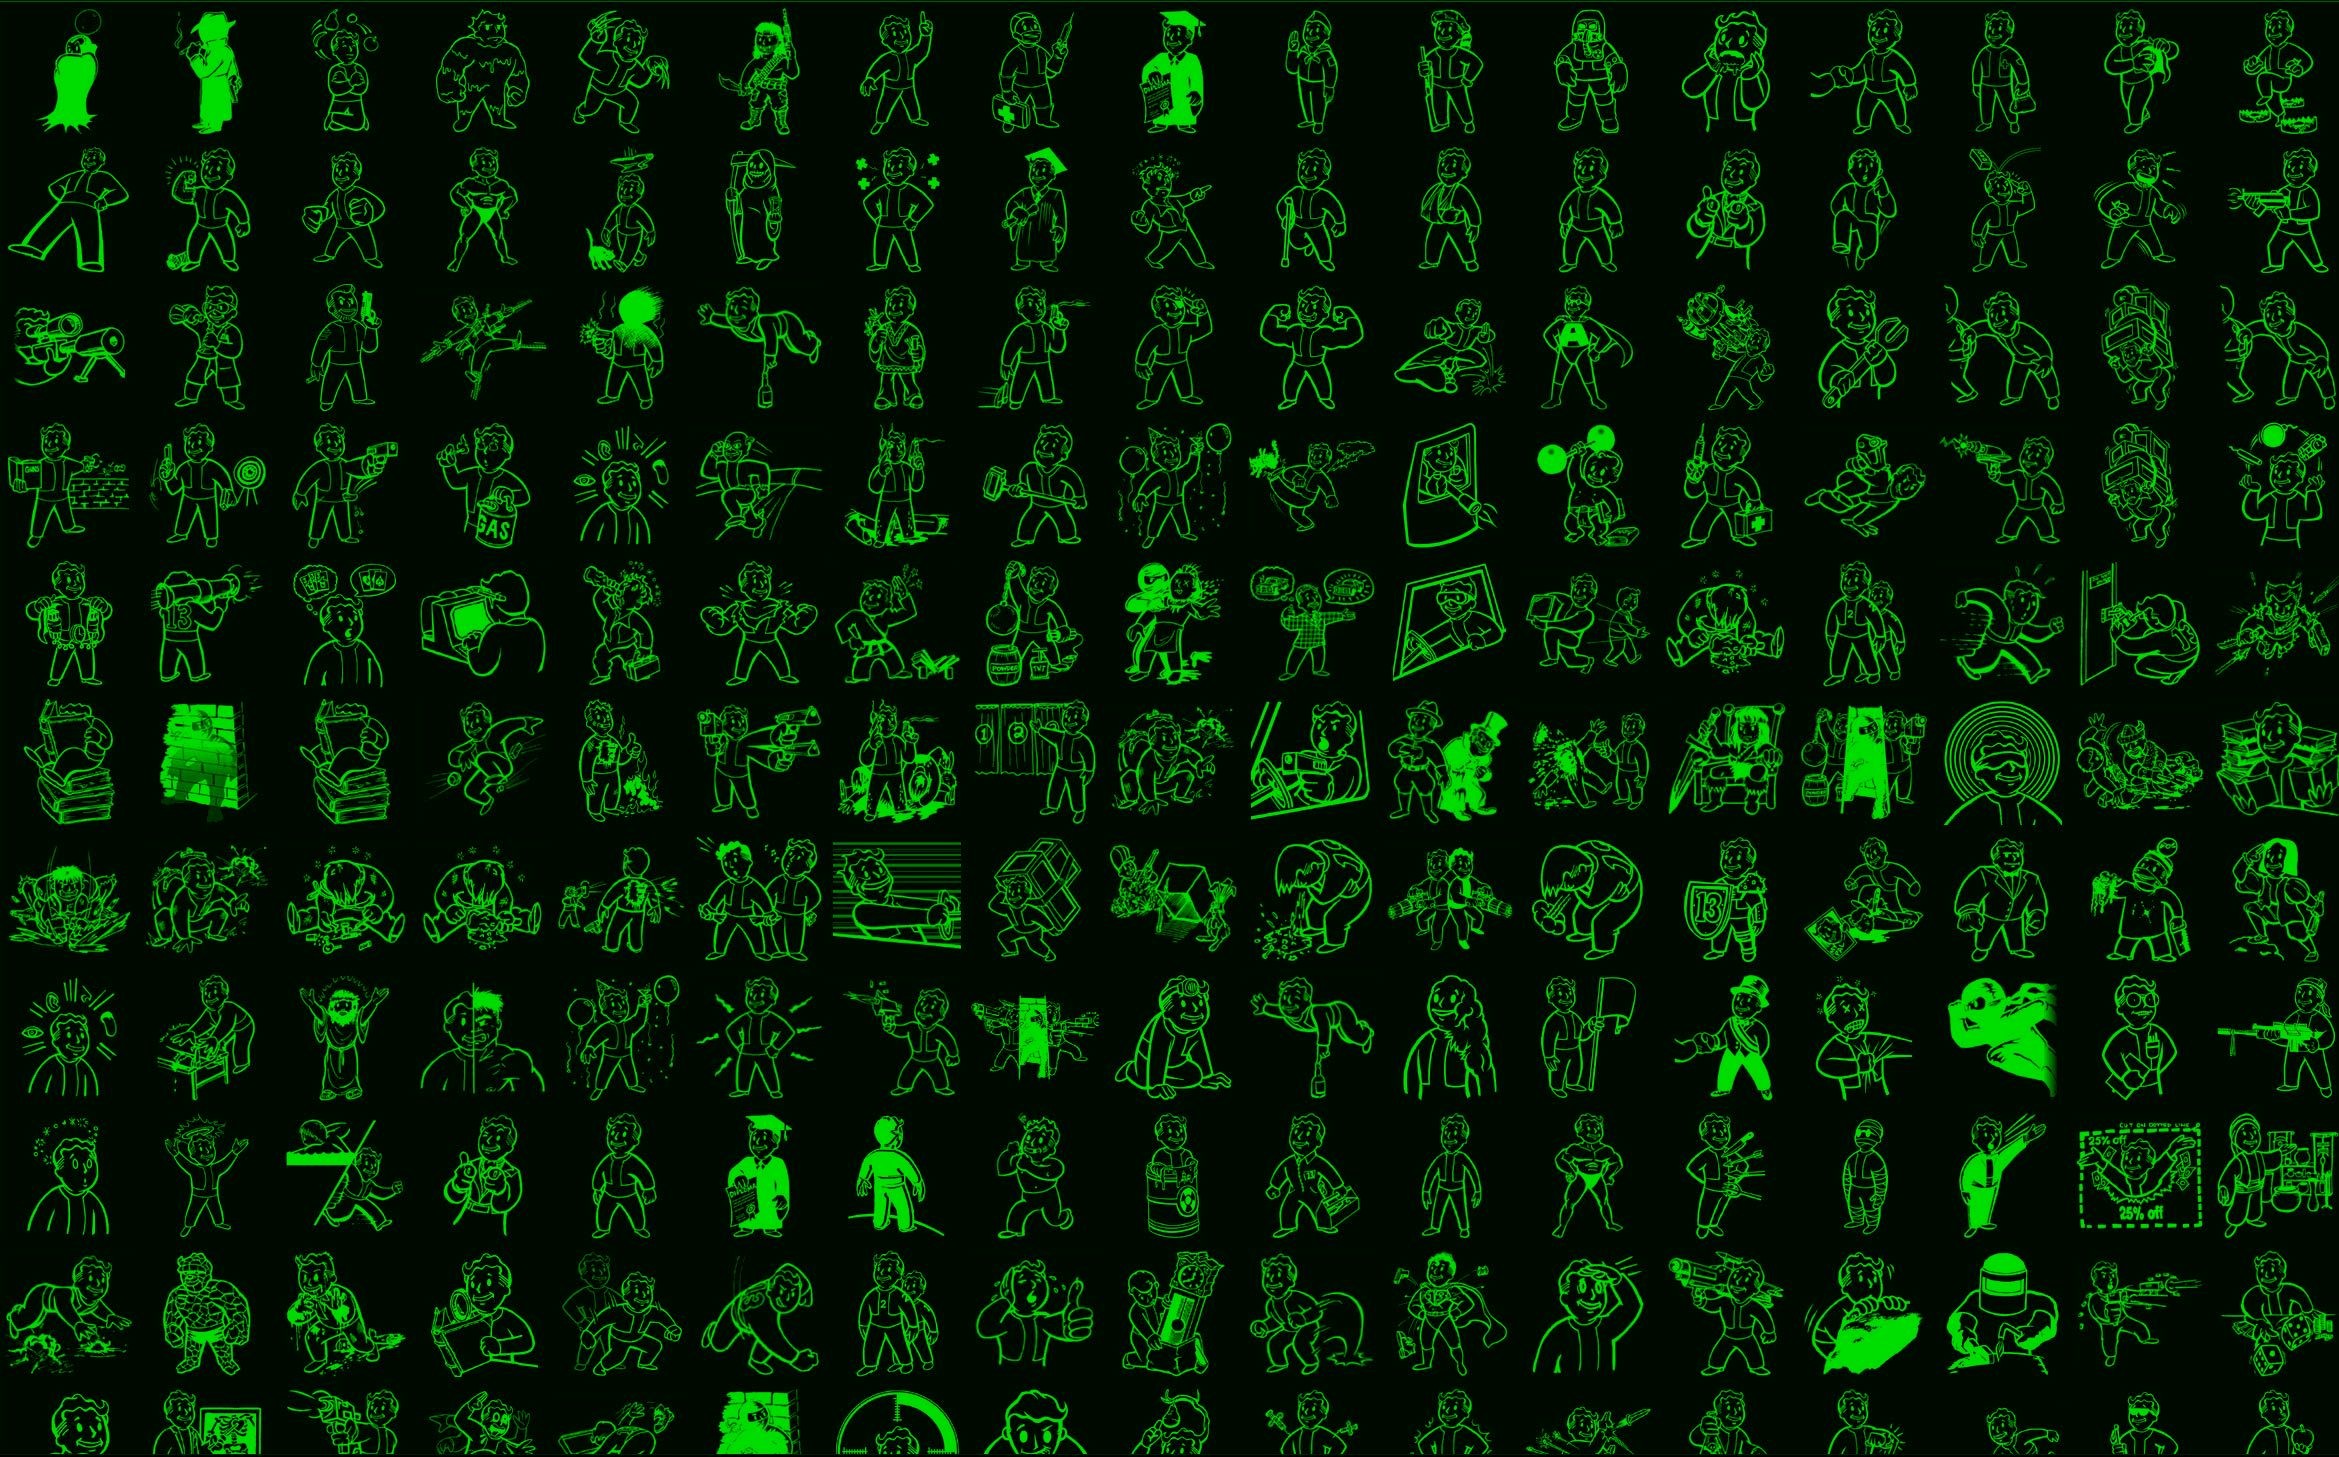 2339x1457 ... fallout pip boy background - Pesquisa Google | Games and Geek .